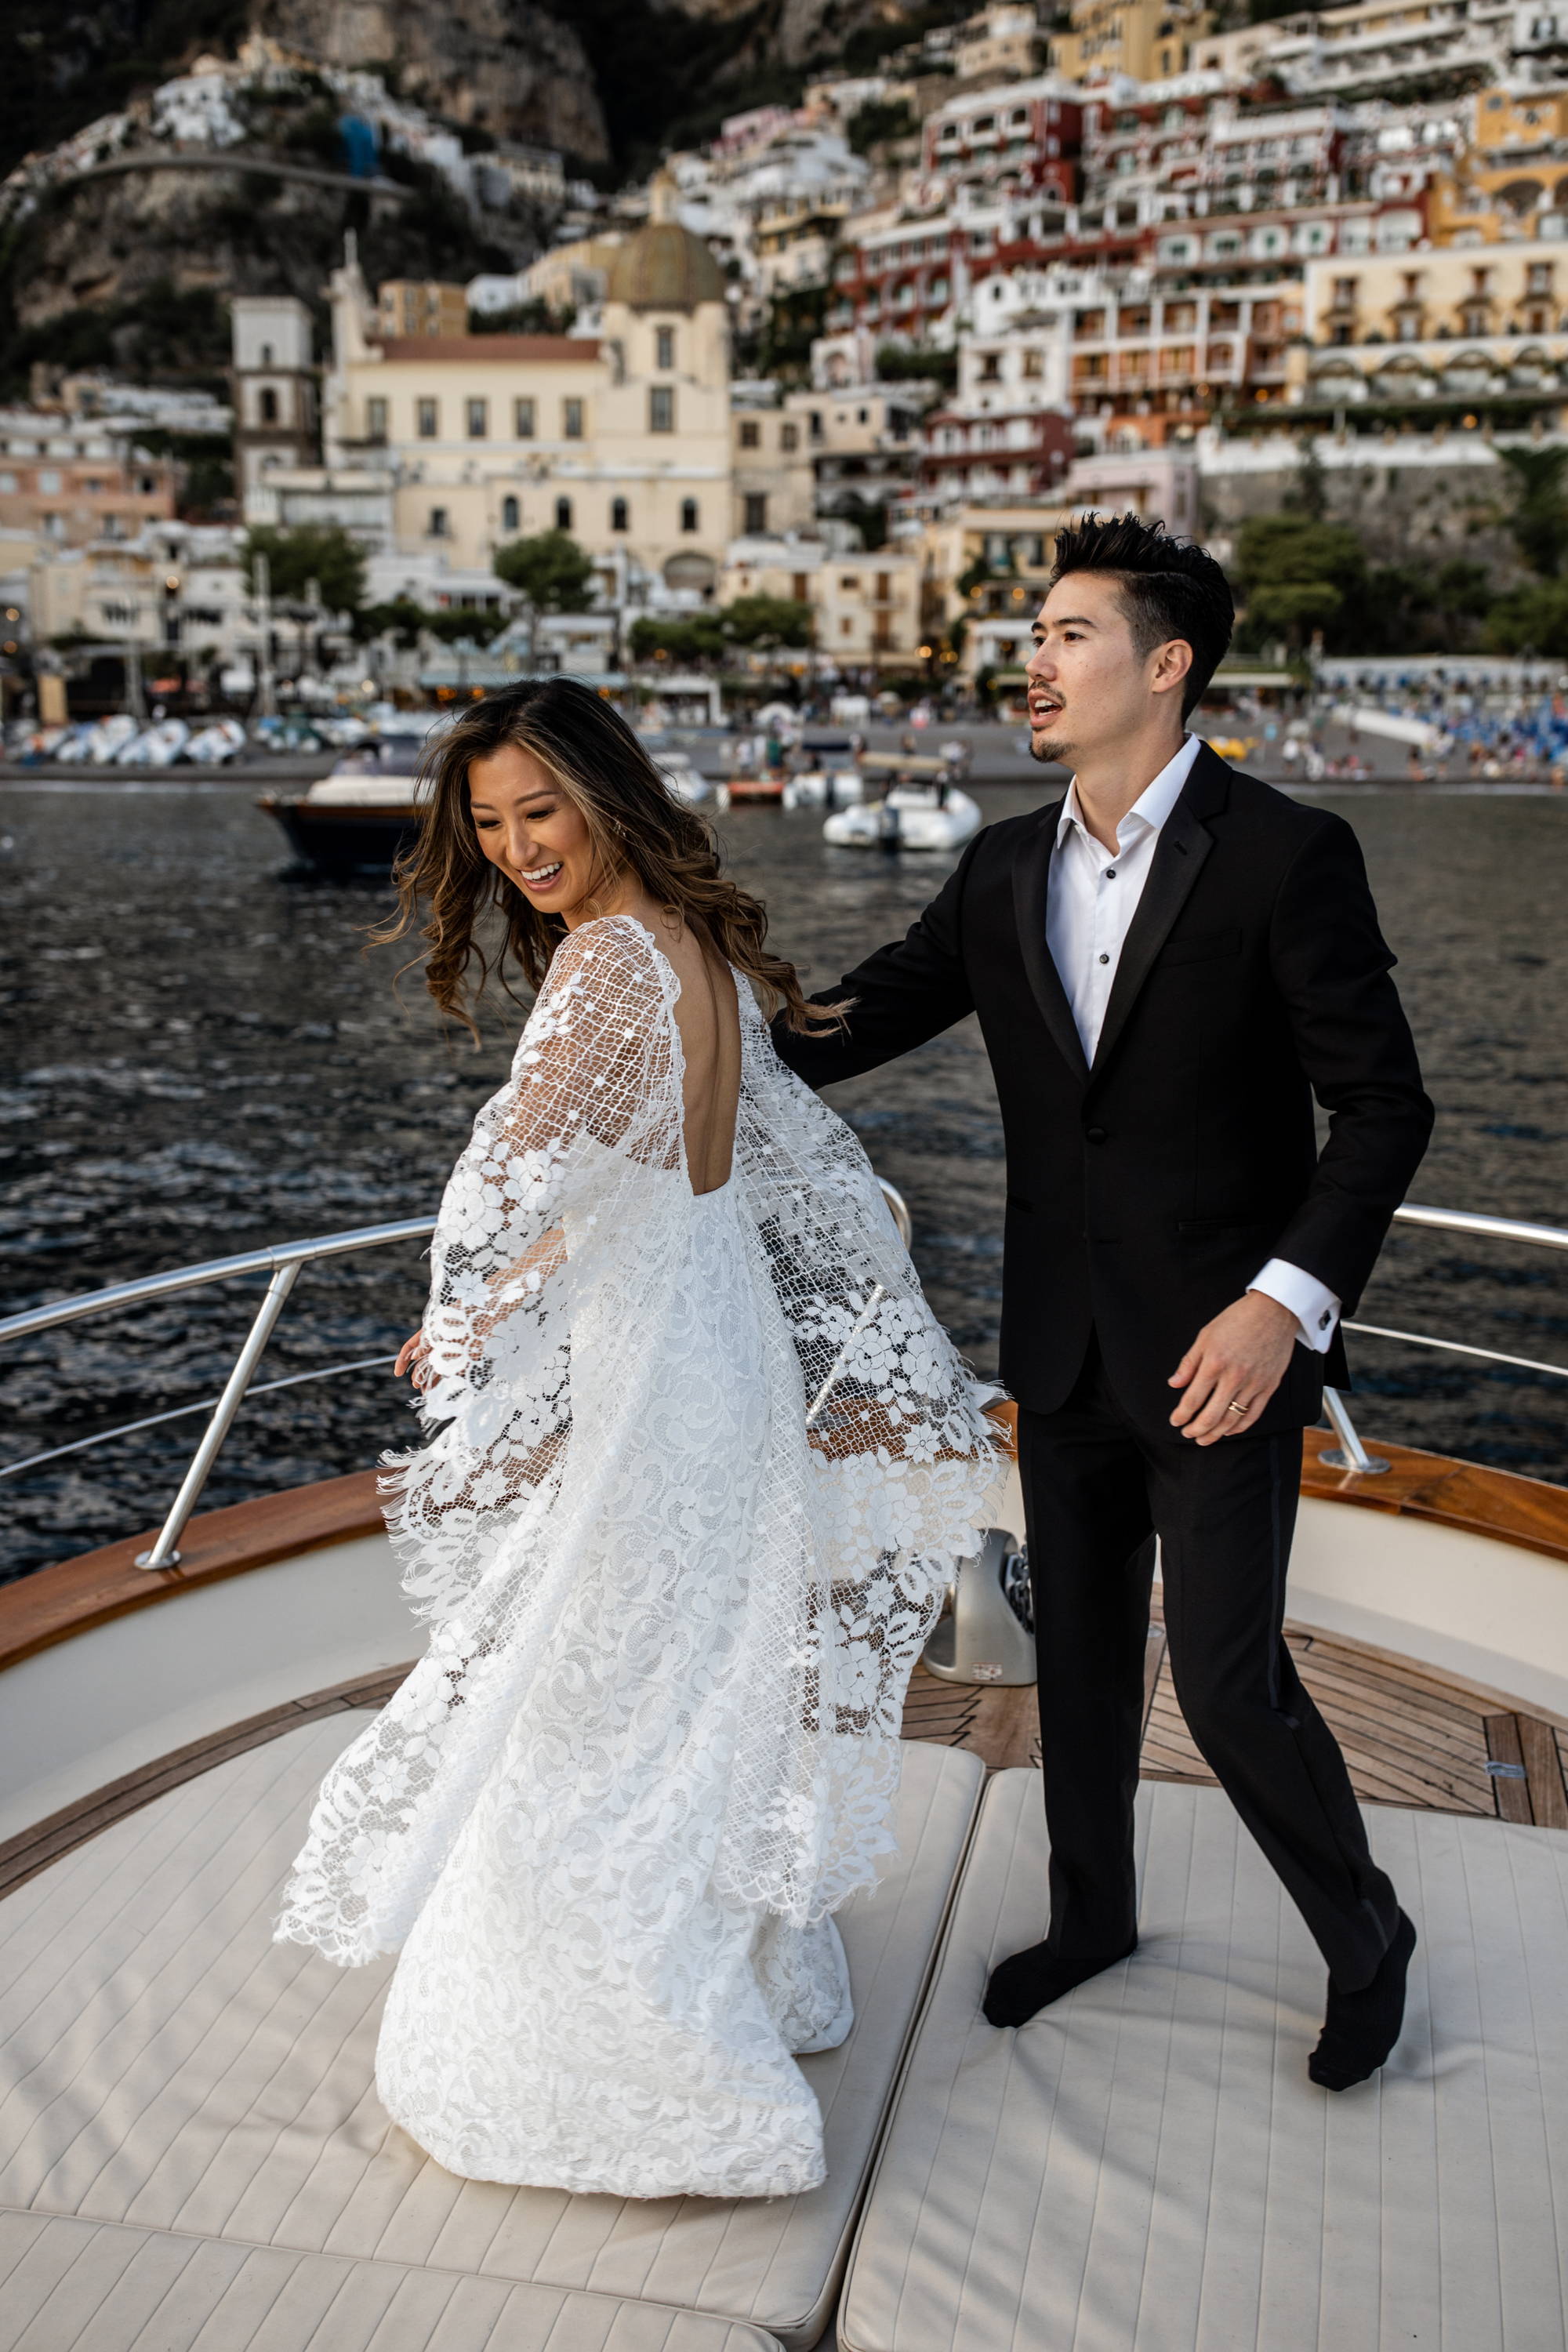 Bride and groom on a yacht in the Amalfi Coast